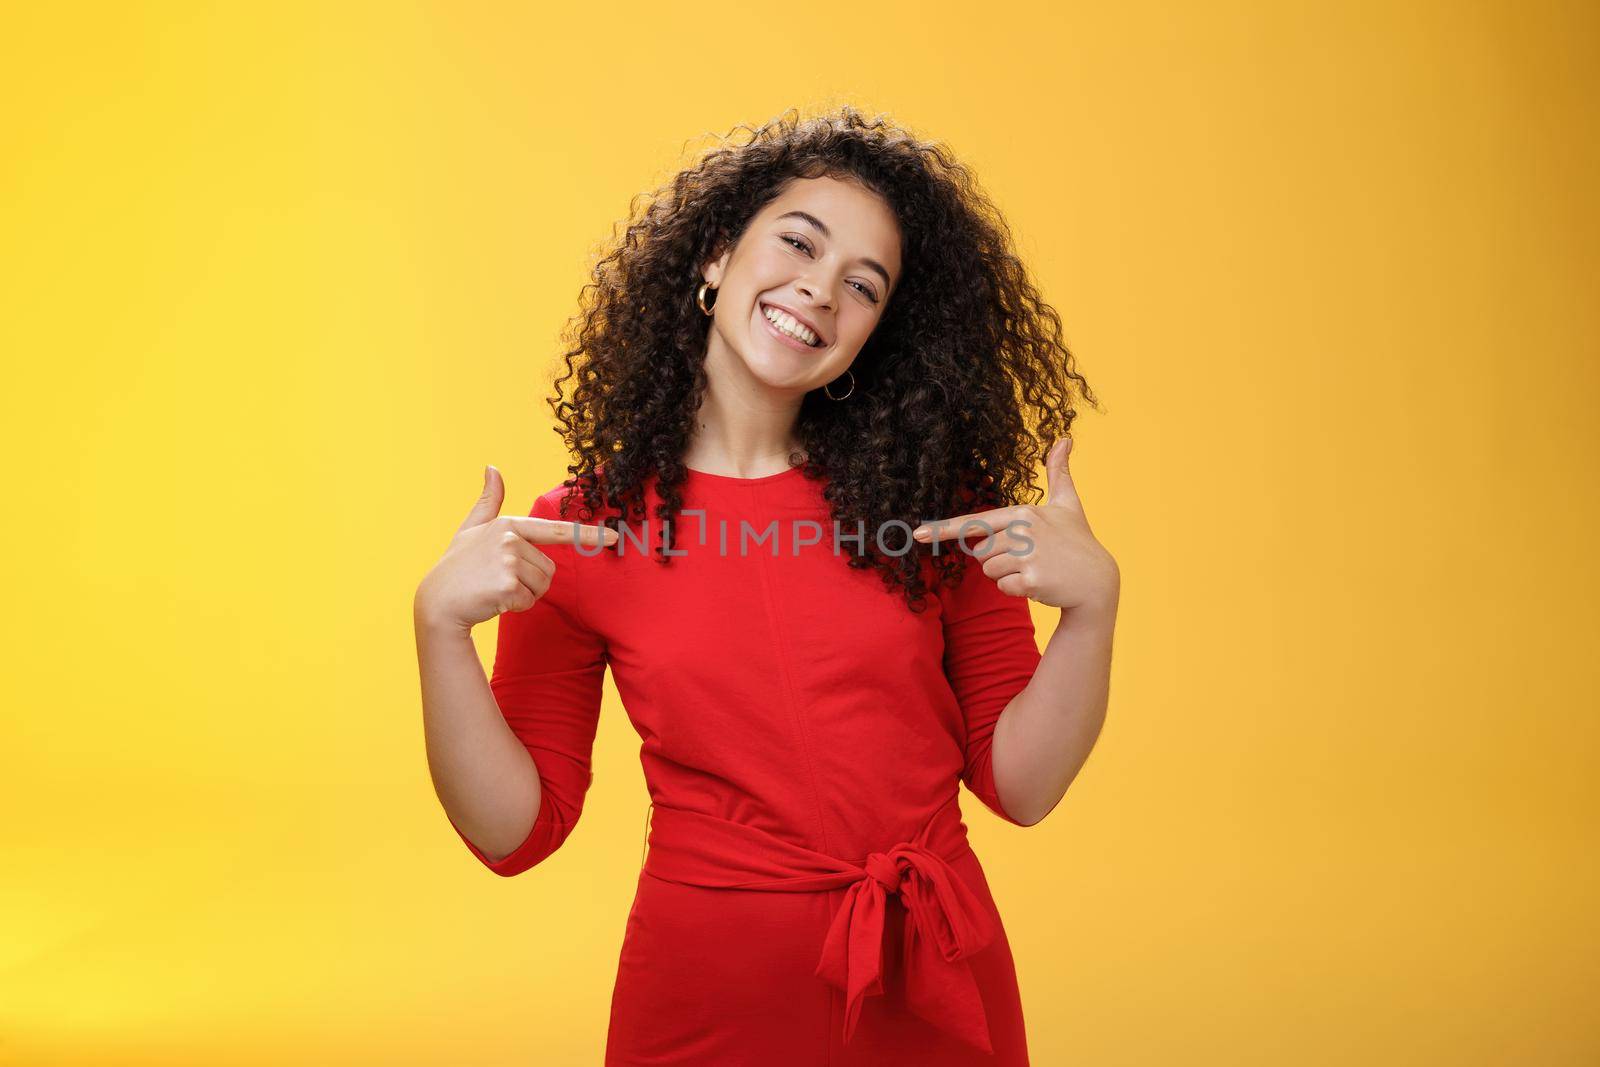 Proud and satisfied ambitious successful female student in red dress standing pleased smiling and pointing at herself as if bragging about own achievements happily and glad over yellow wall.